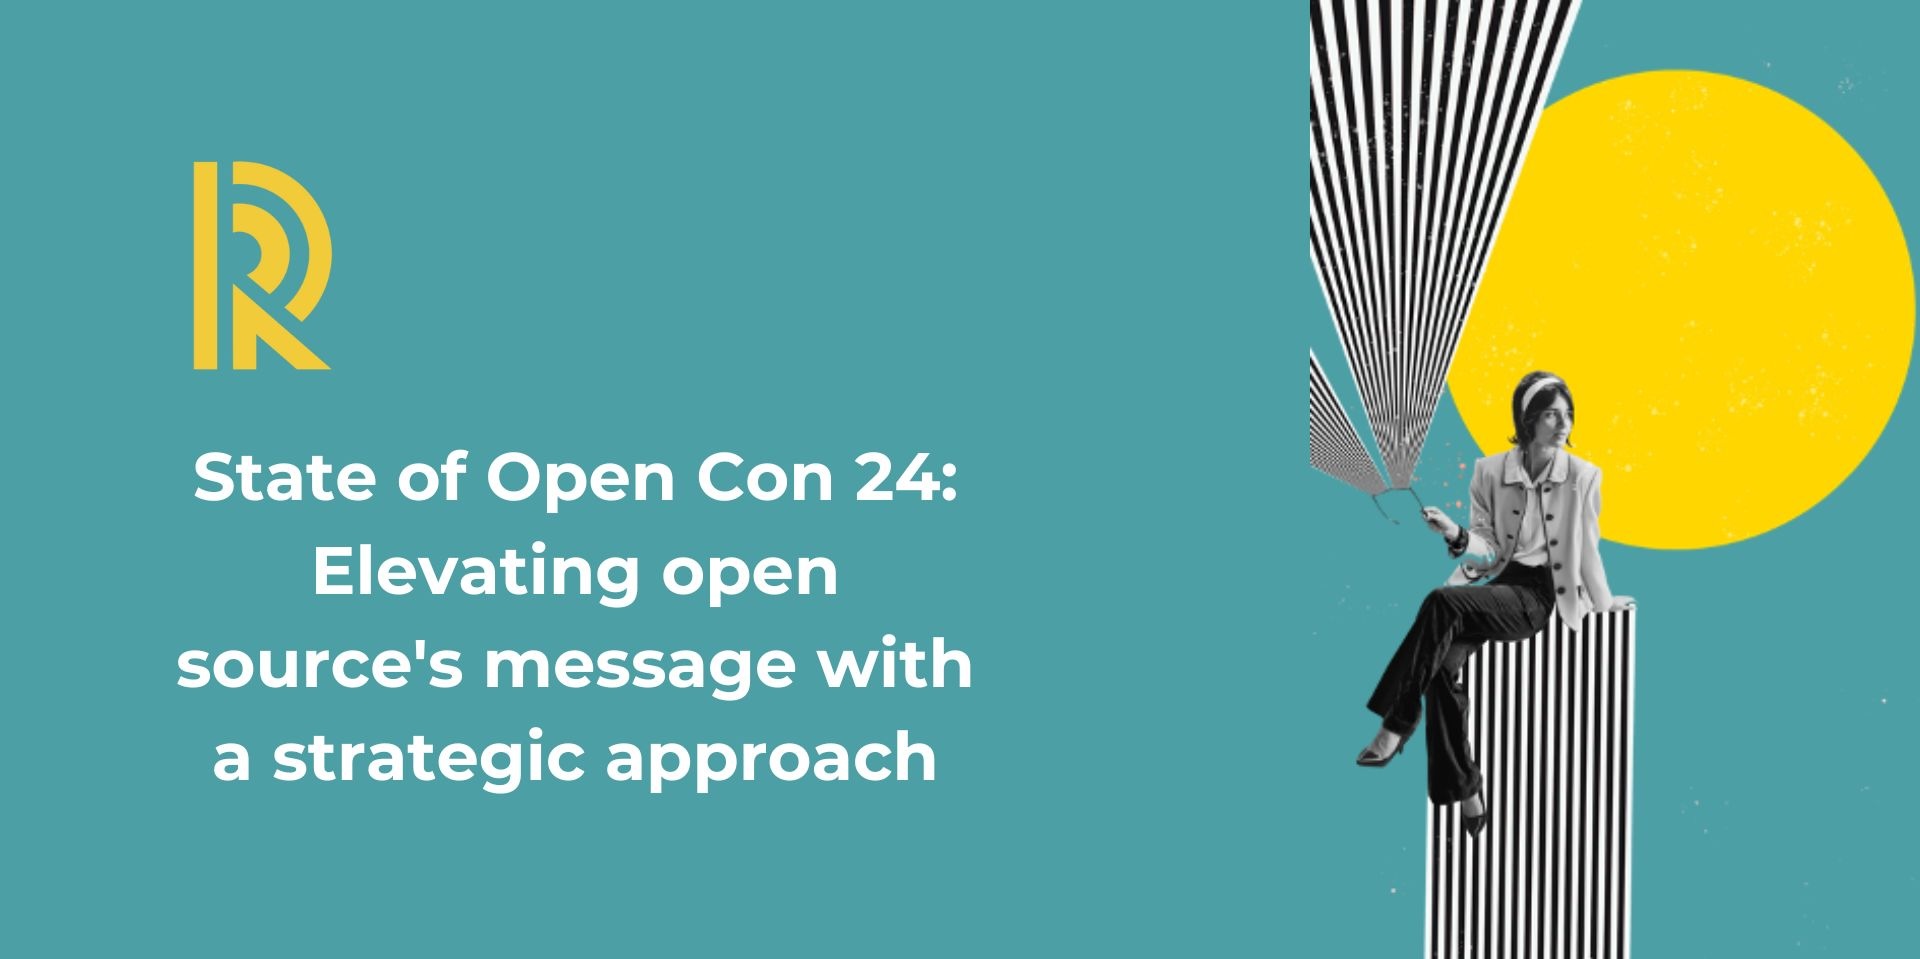 State of Open Con 24: Elevating open source's message with a strategic approach